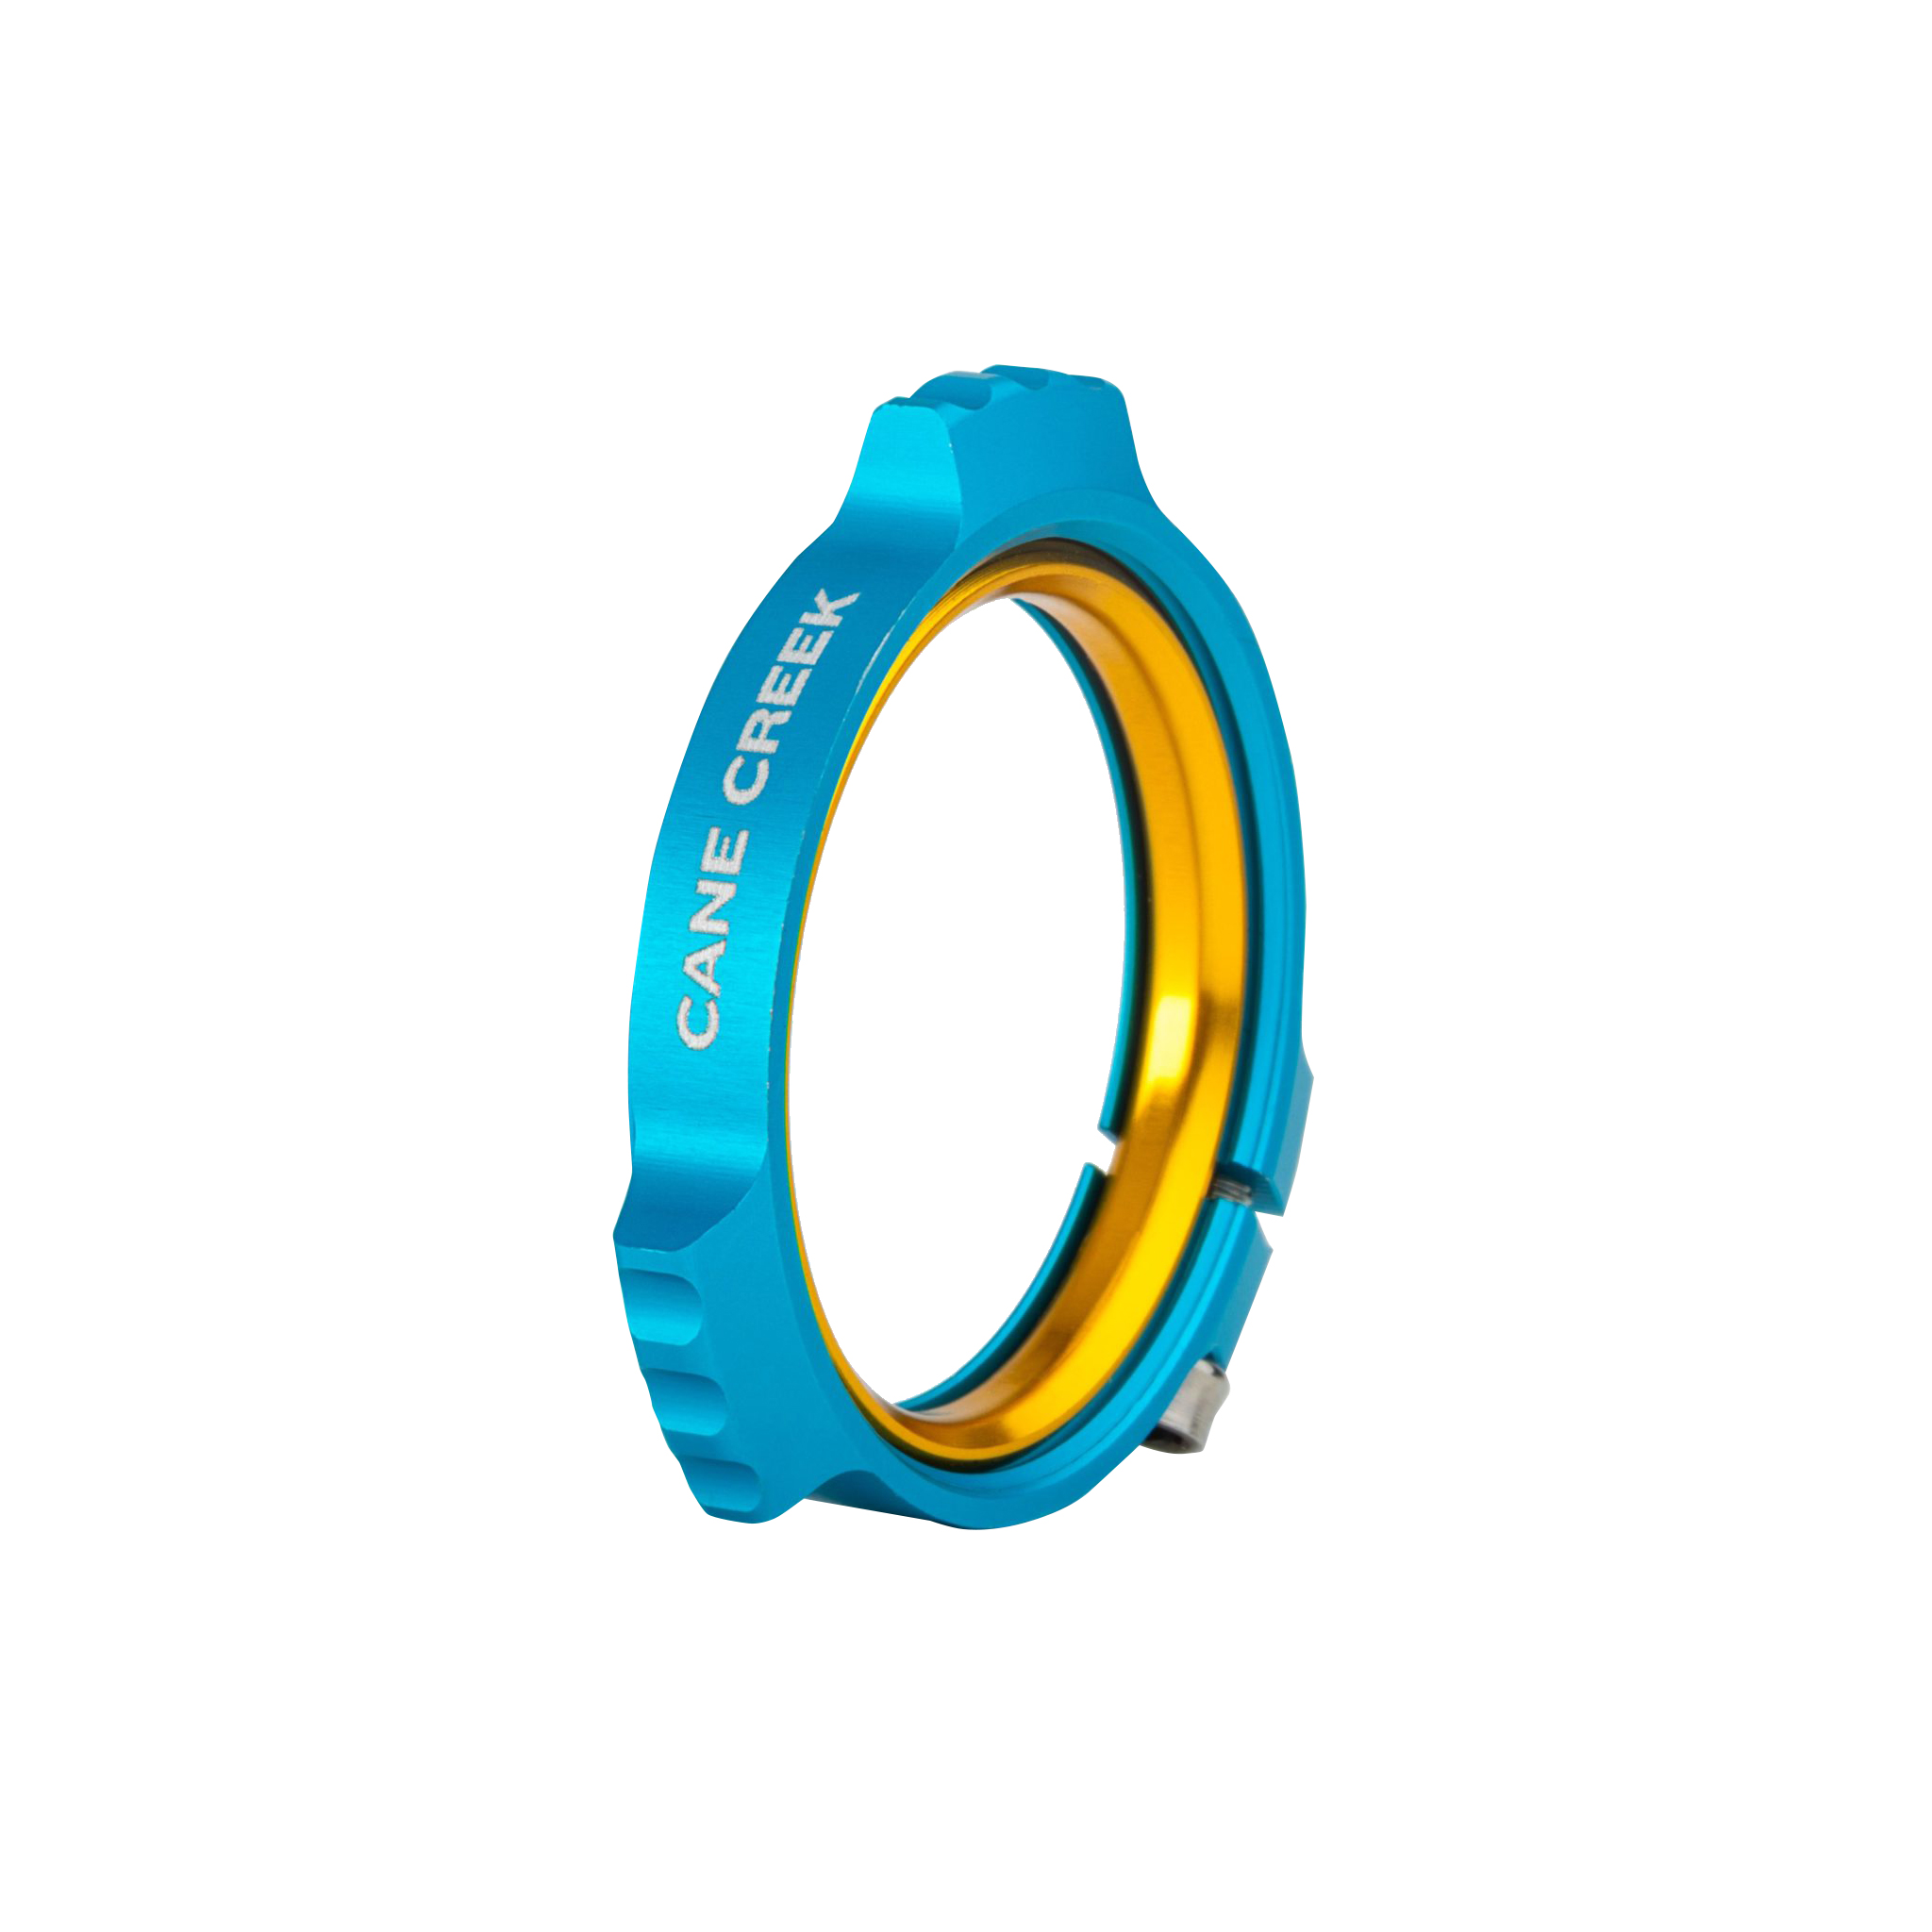 Cane Creek Alloy Preload Collar and Ti Bolt- Turquoise 